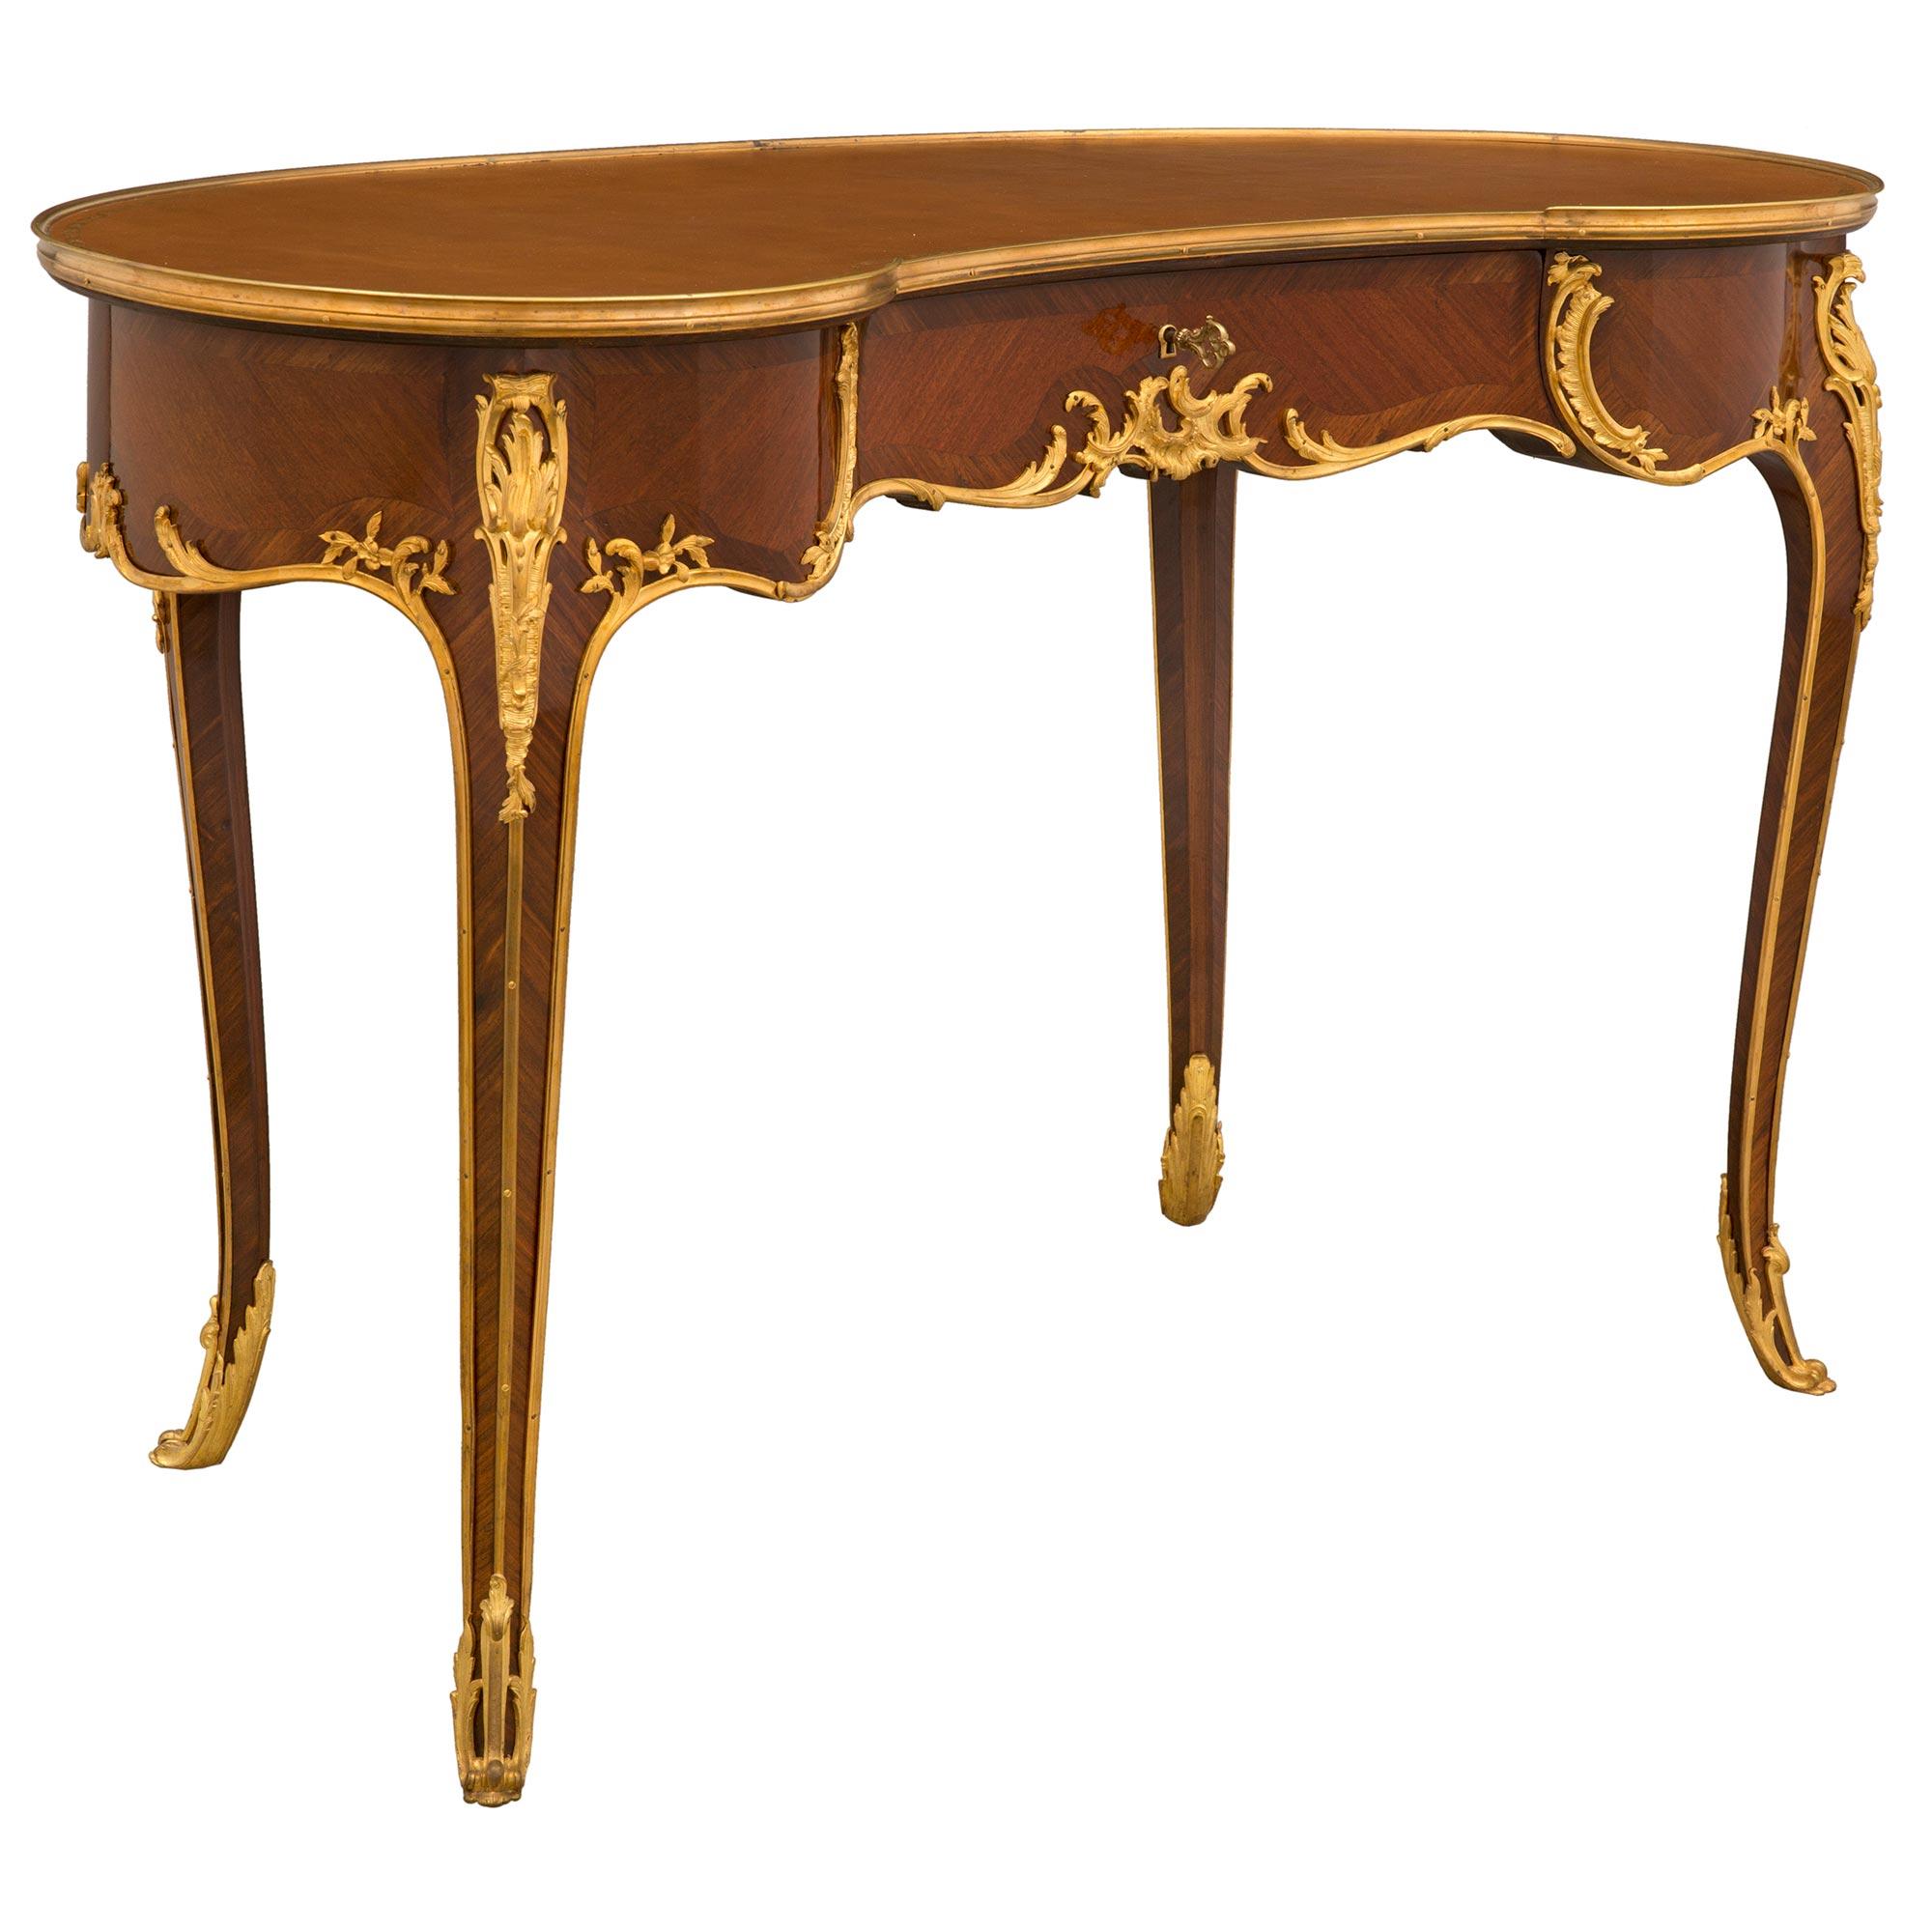 French 19th Century Louis XV Style Kingwood and Ormolu Desk, Attributed to Linke In Good Condition For Sale In West Palm Beach, FL